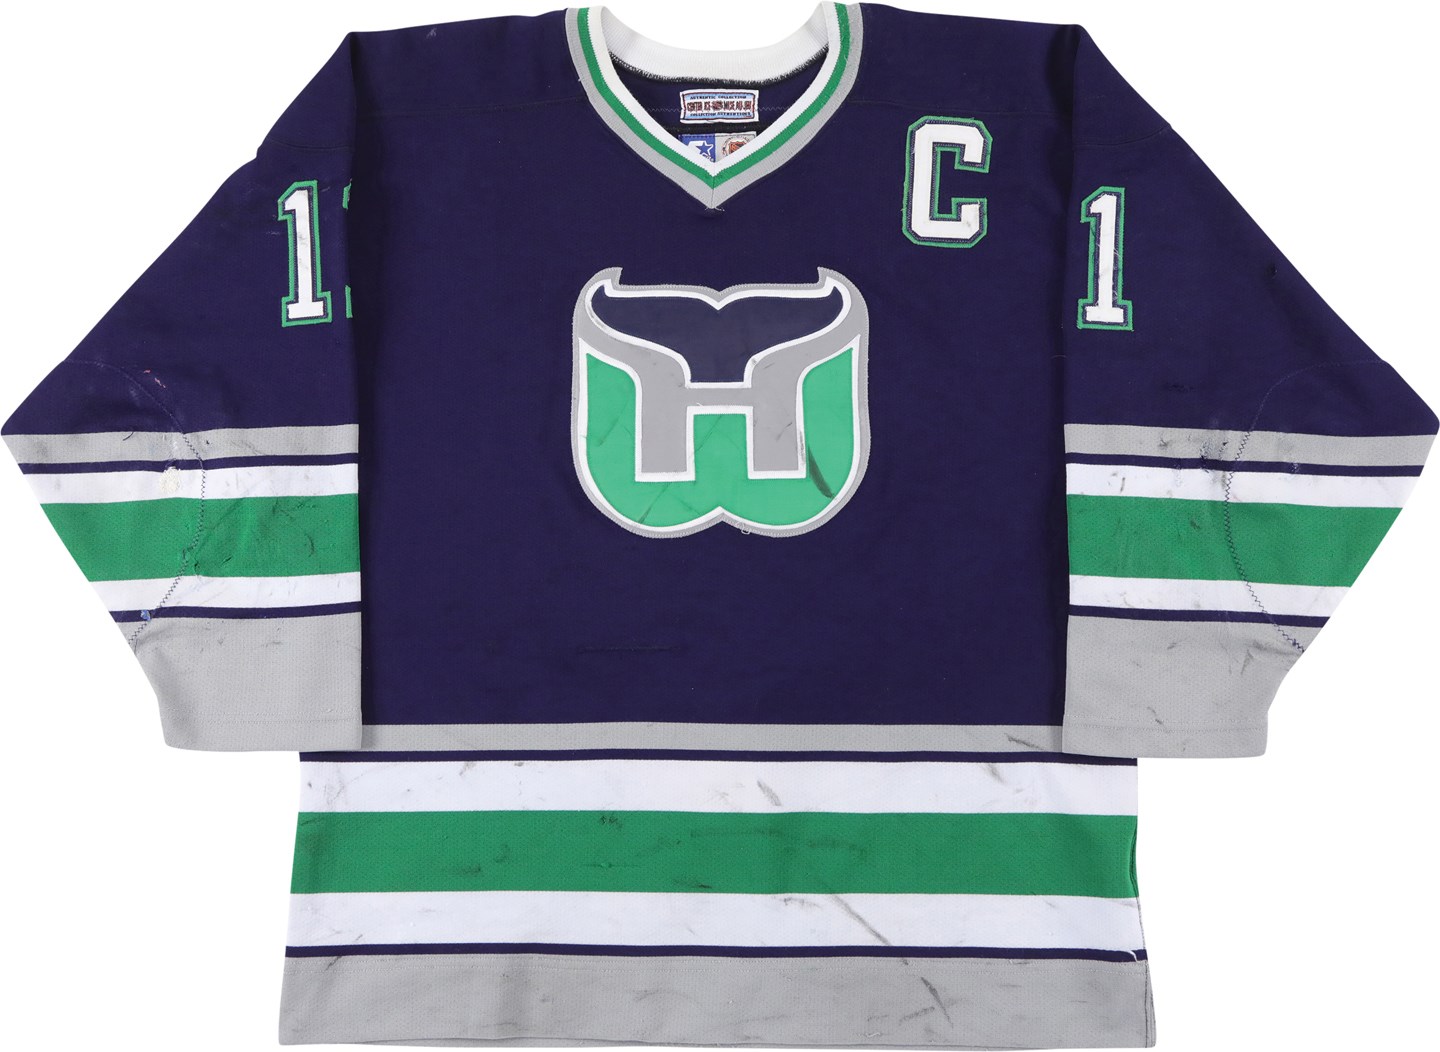 - 1996-97 Kevin Dineen Hartford Whalers Game Worn Jersey - Whalers Final Season (Three Photo-Matches & Team Sourced)